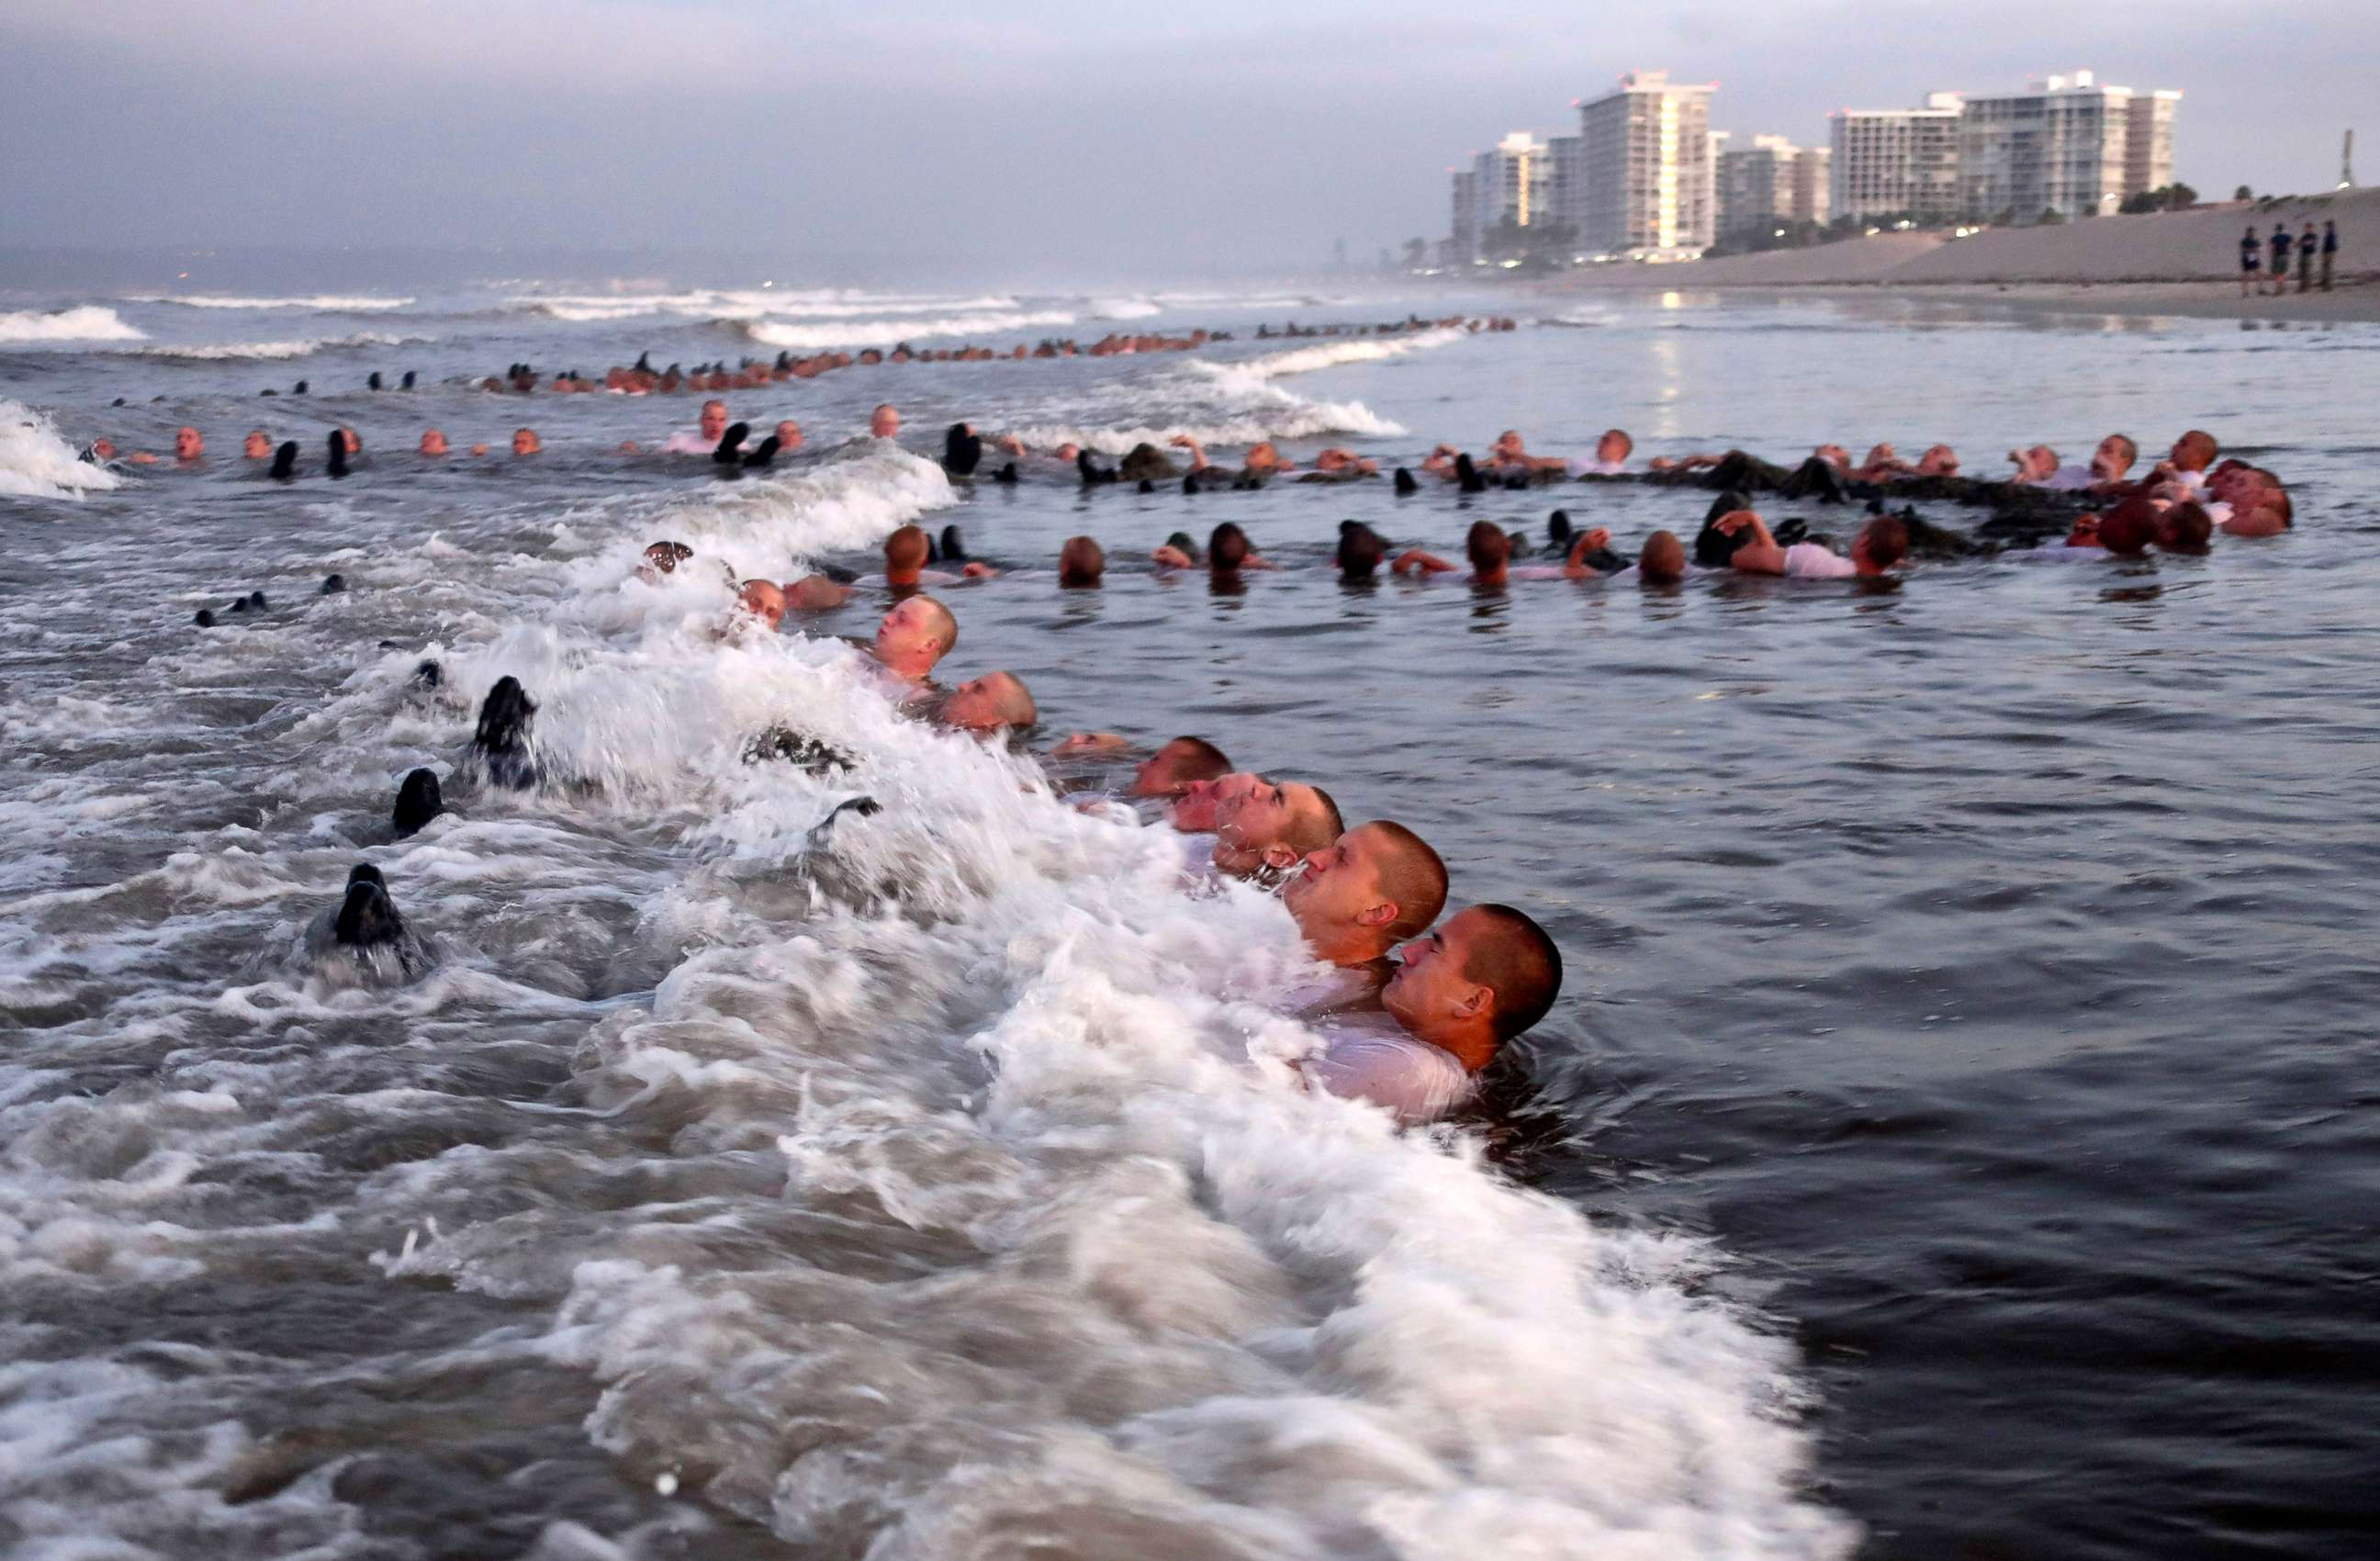 PHOTO: Navy SEAL candidates, participate in "surf immersion" during Basic Underwater Demolition/SEAL training at the Naval Special Warfare Center in Coronado, Calif.,  May 4, 2020.